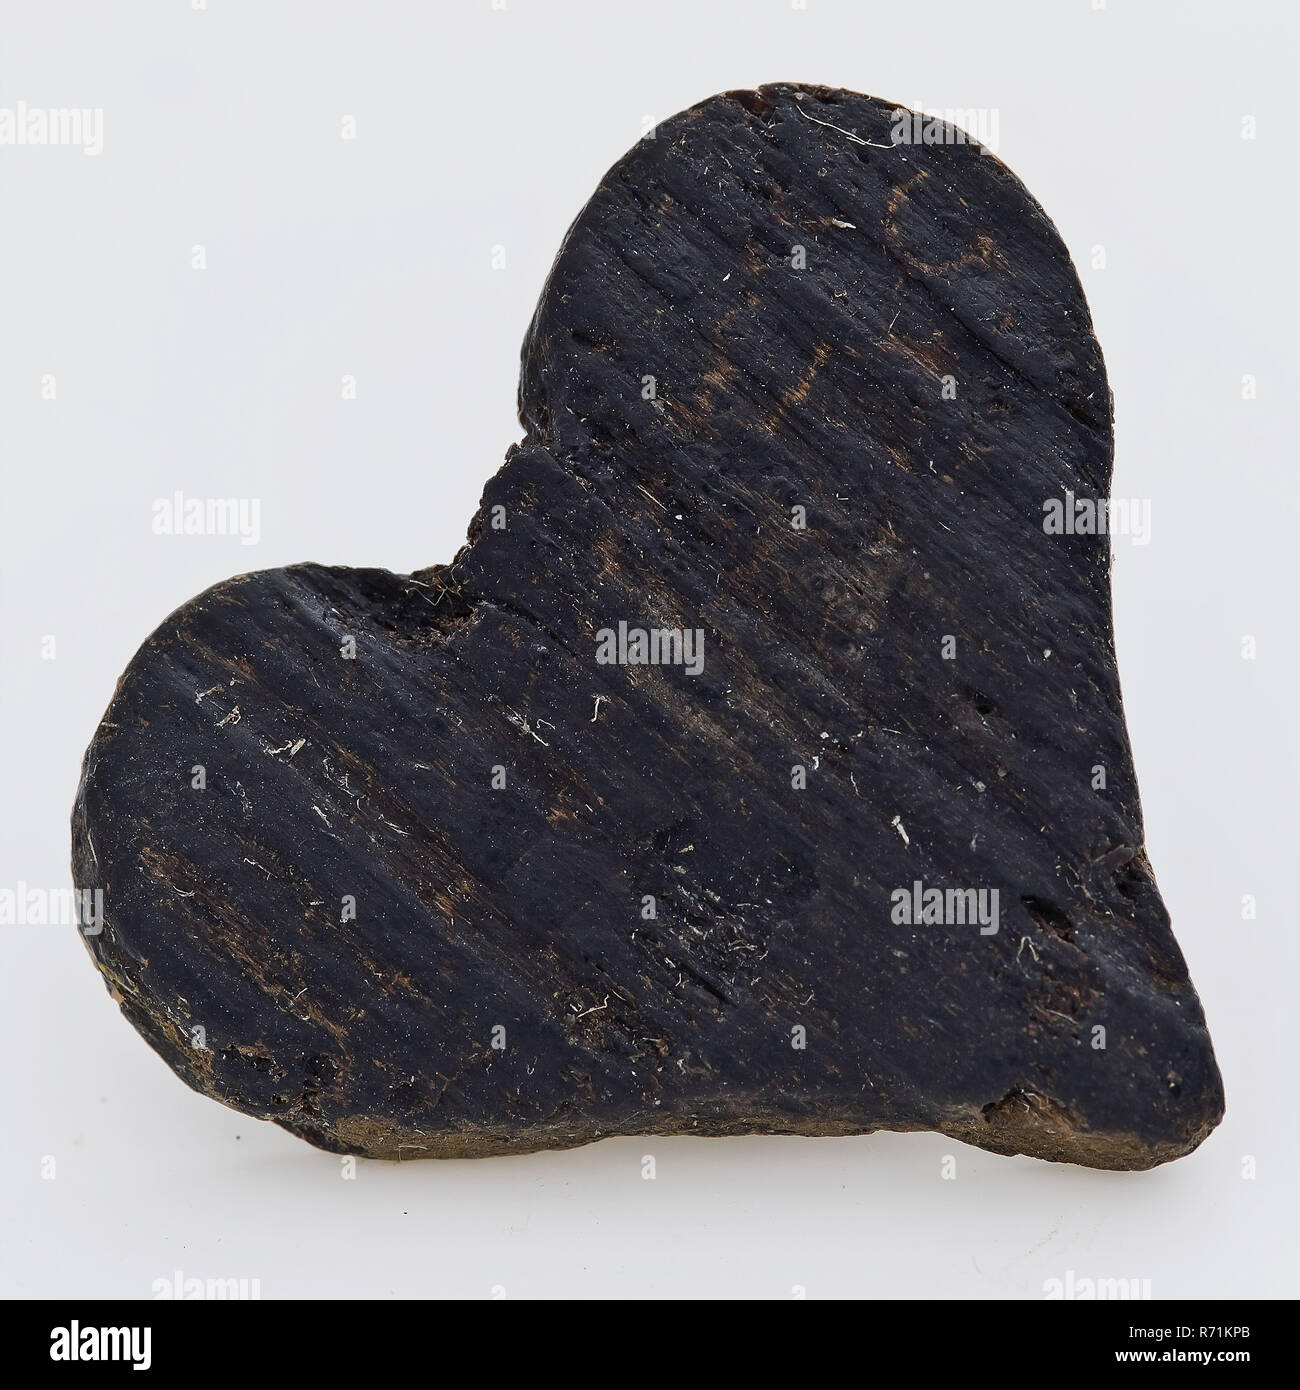 Small wooden heart, decoration soil find wood, sawn cut Wooden heart. Cut out heart of soft wood Clear wood grain archeology Rotterdam IJsselmonde indigenous woodwork decorate Soil discovery: IJsselmonde Castle from the Rotterdam 1972 cesspit. Stock Photo